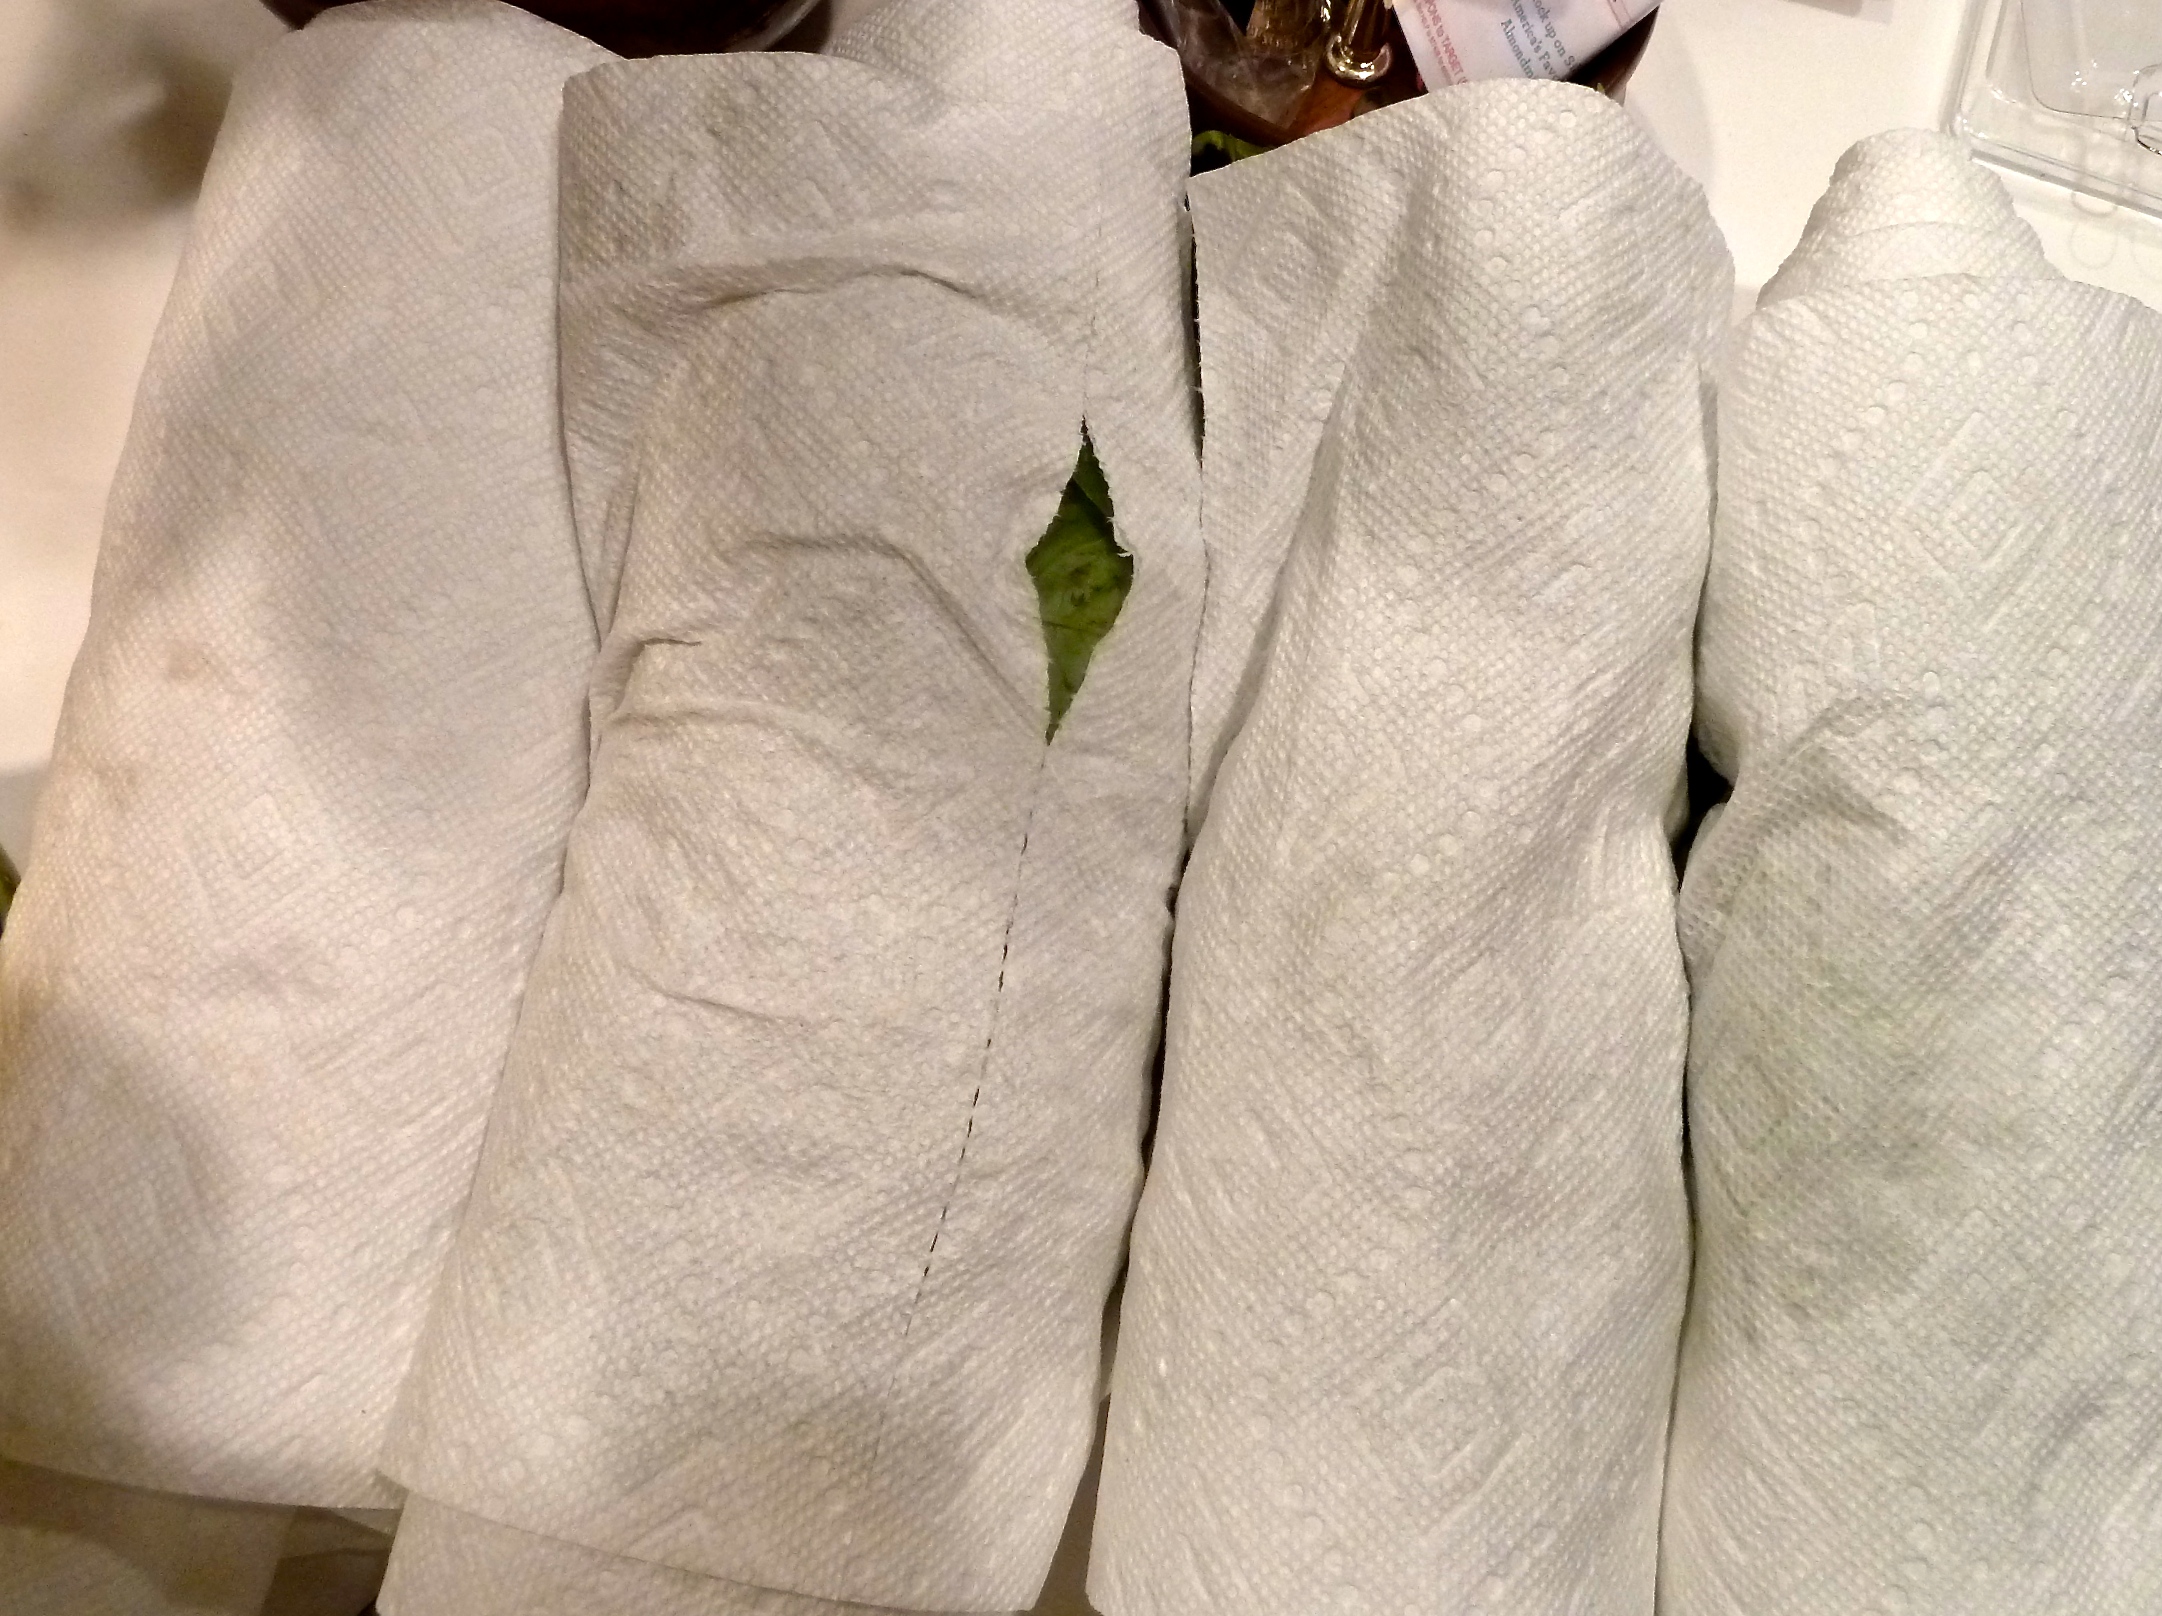 Roll up the Basil in Paper Towels to Dry